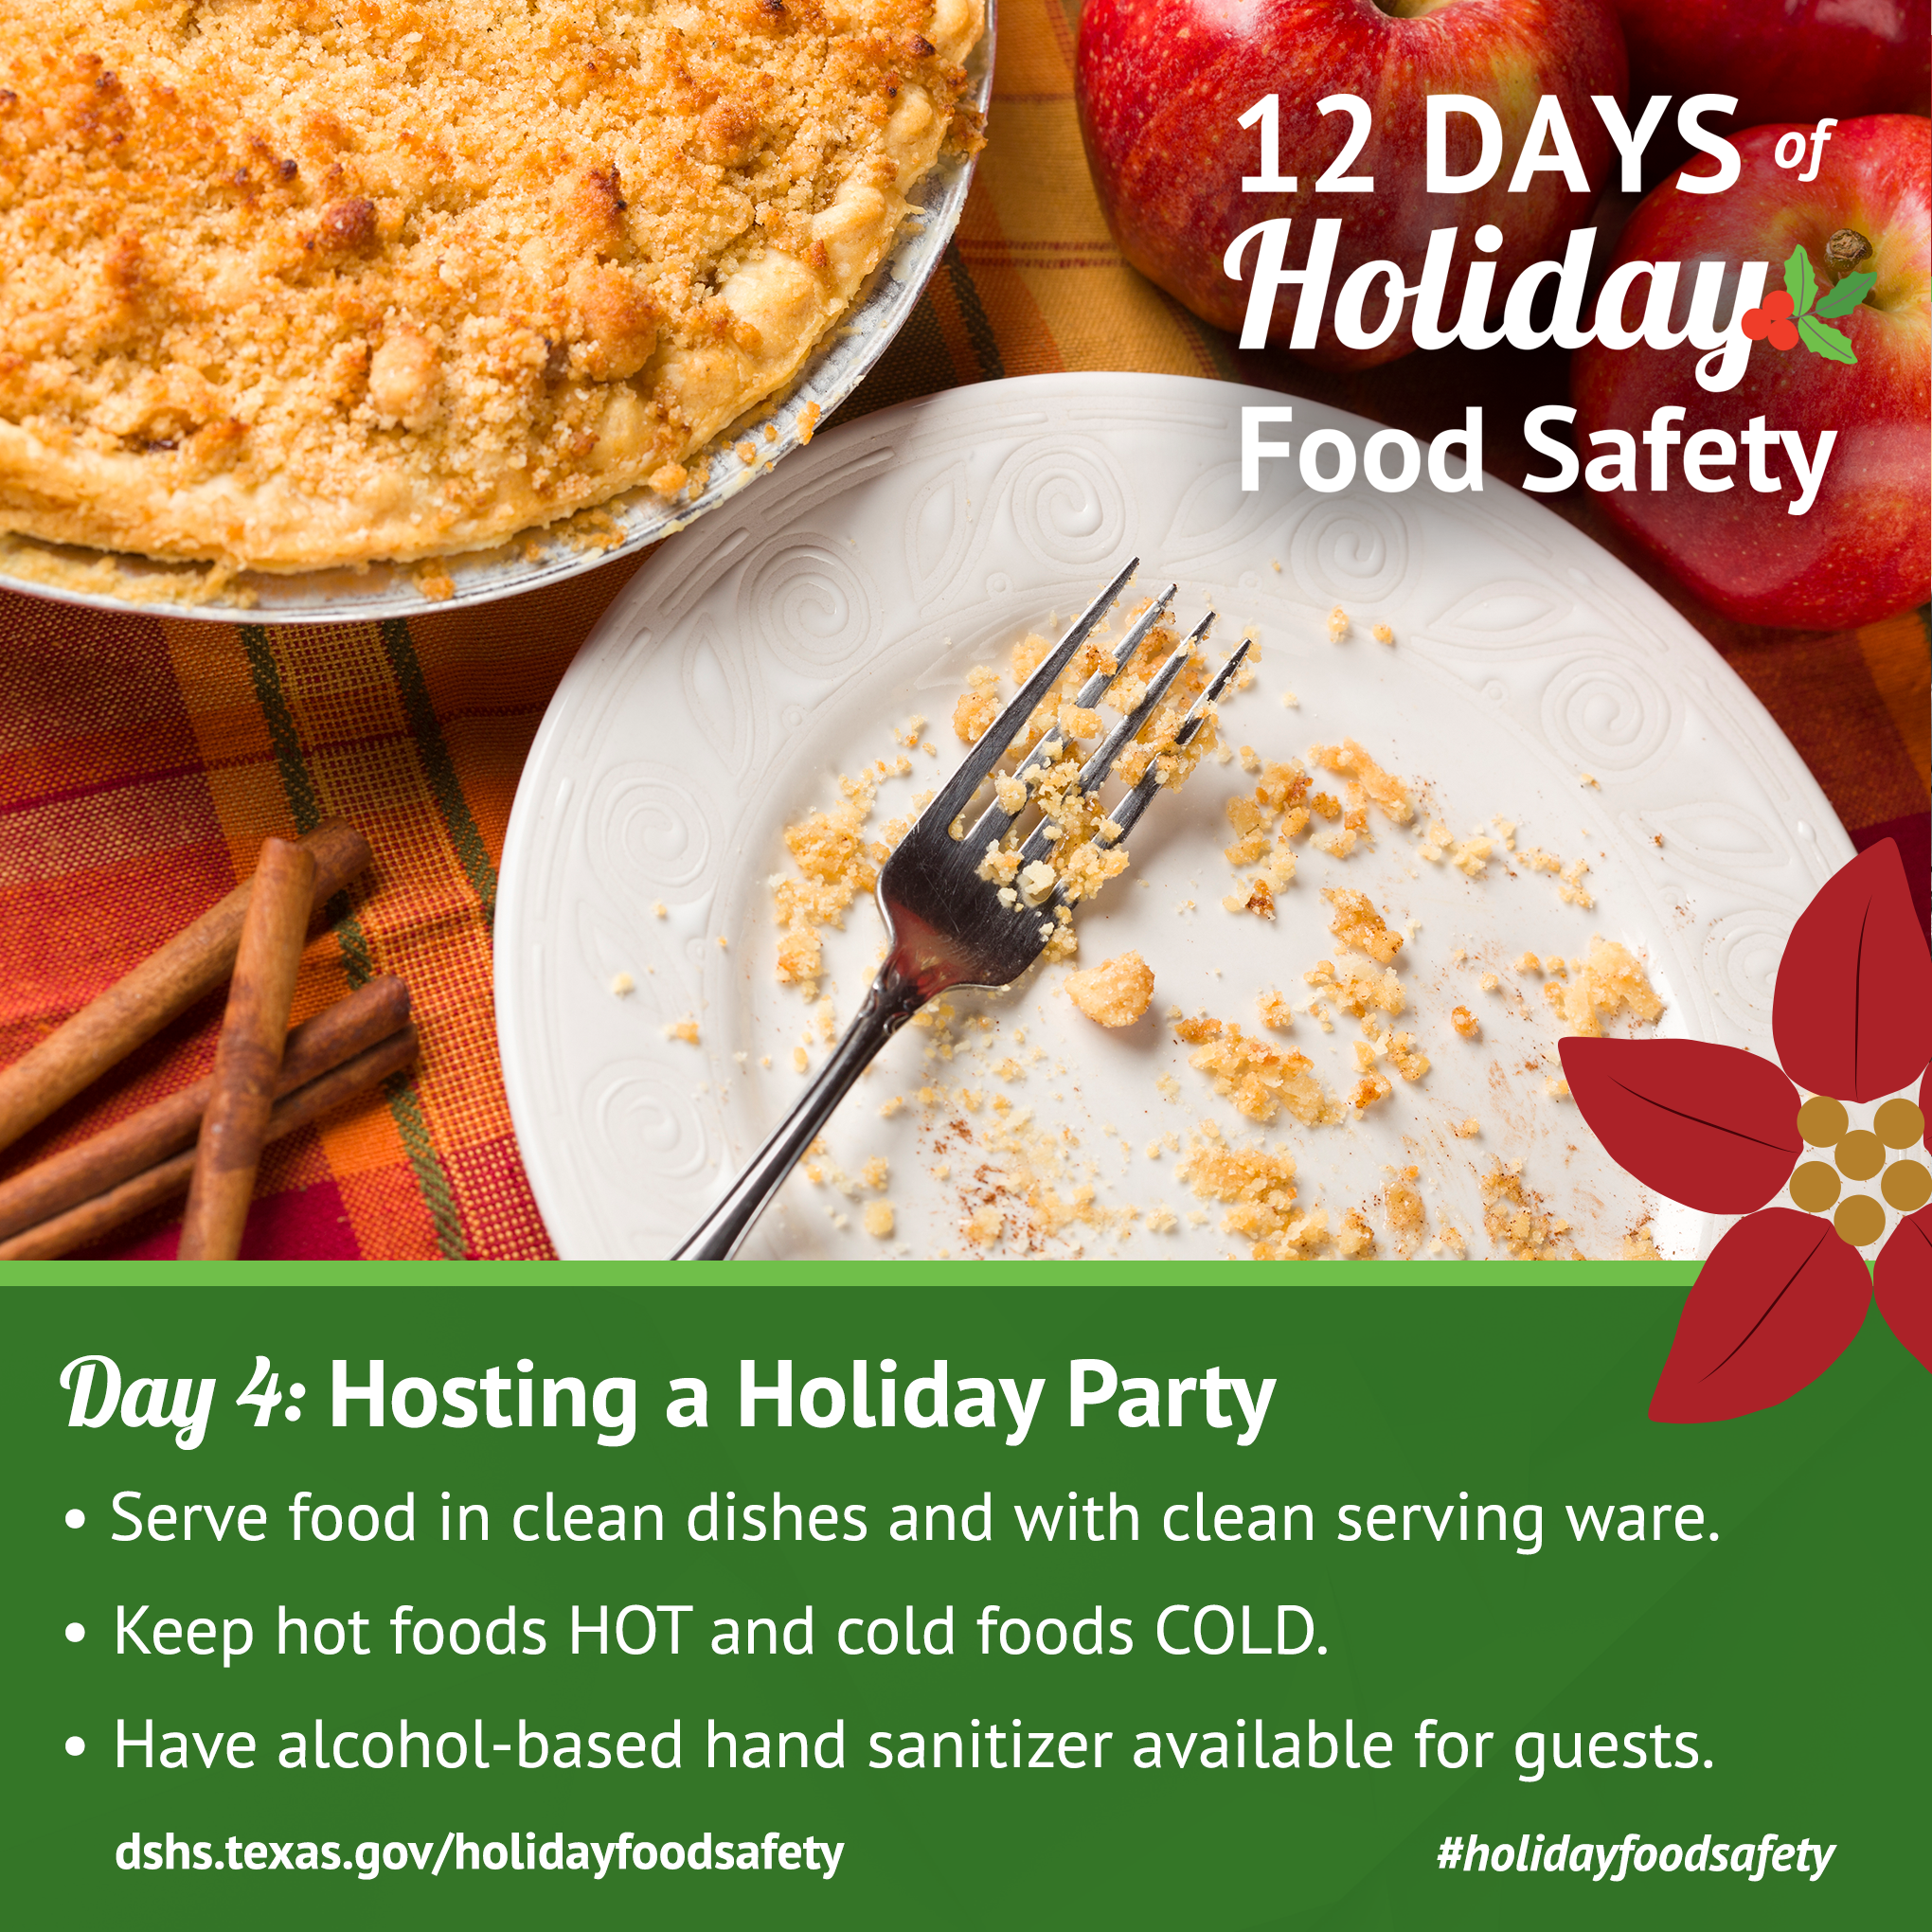 https://www.dshs.texas.gov/sites/default/files/uploadedImages/Content/Consumer_and_External_Affairs/campaigns/holidayfoodsafety/images/day4-holiday-food-safety.png